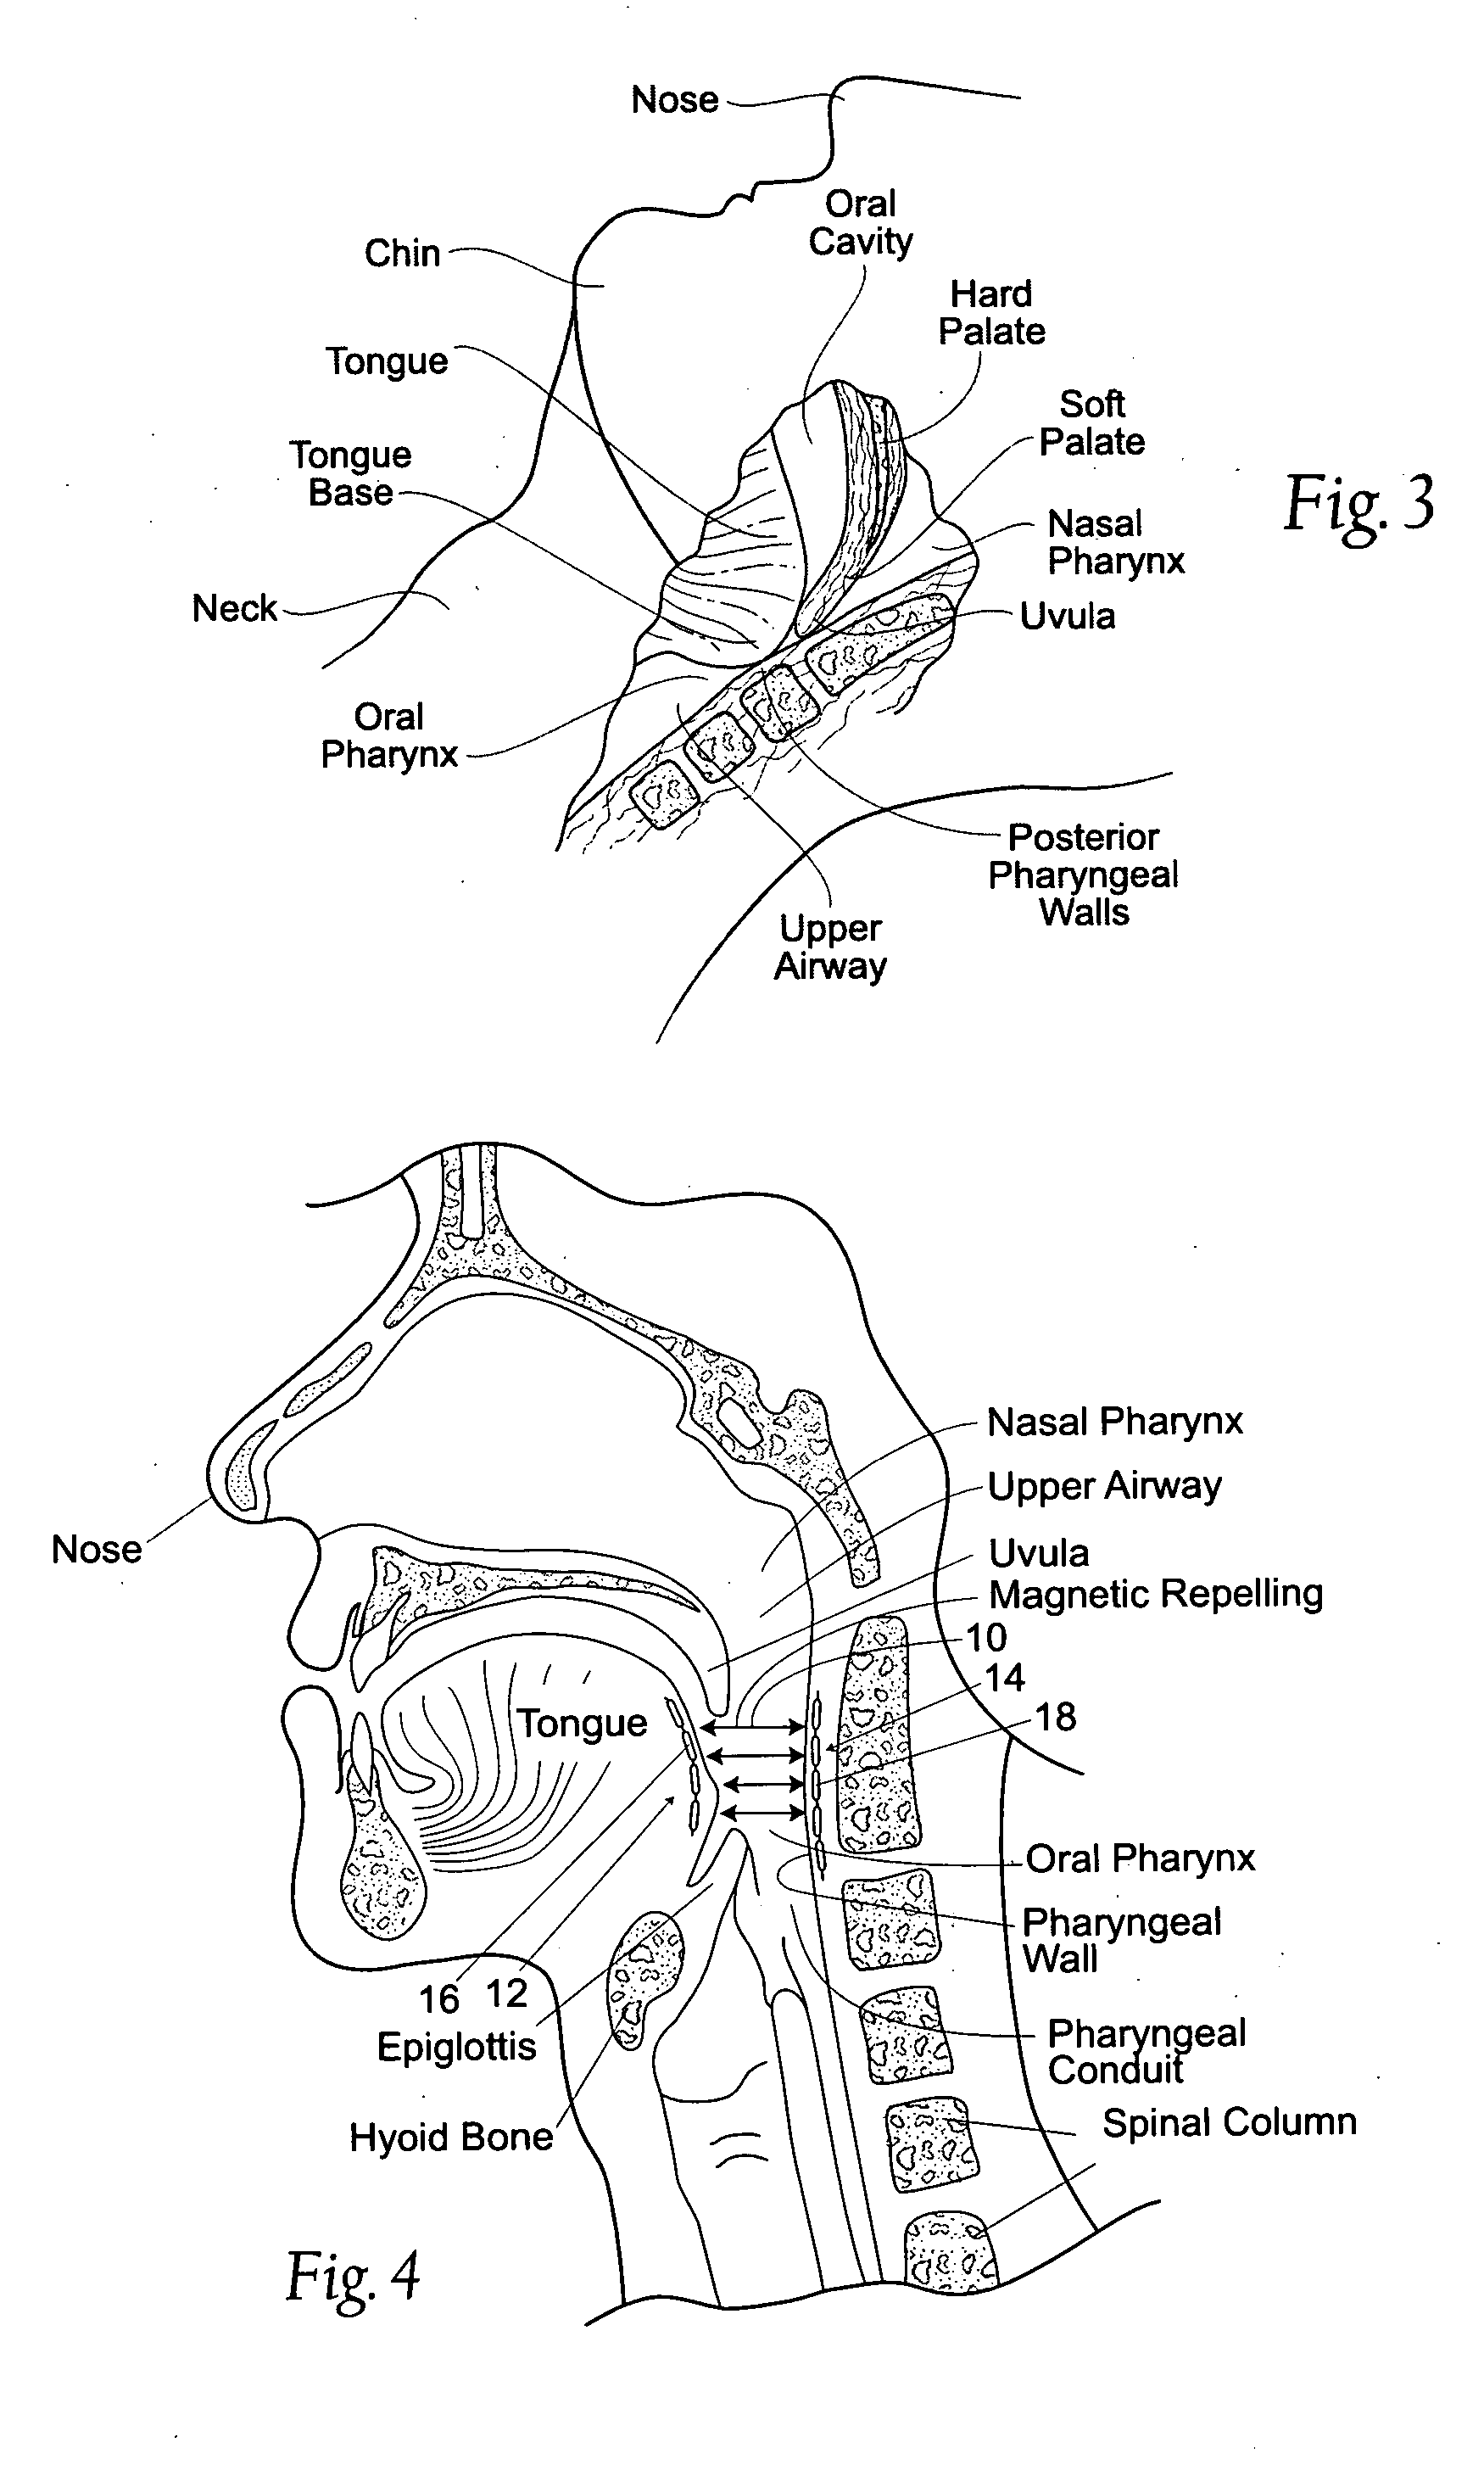 Devices, systems and methods using magnetic force systems in the tongue